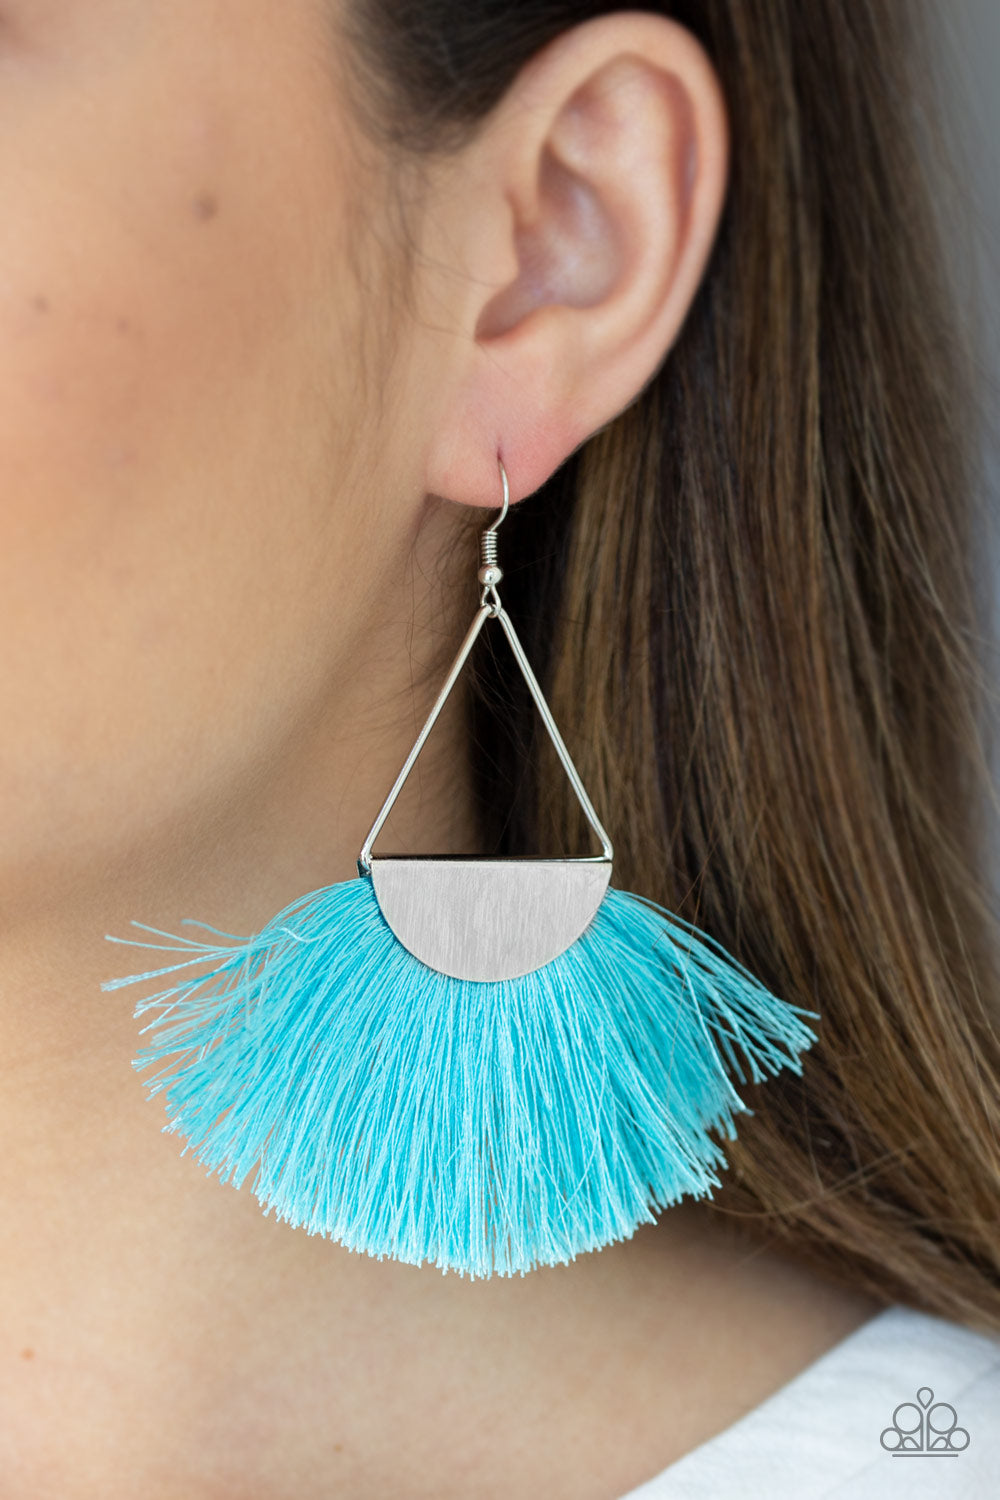 Paparazzi Accessories Modern Mayan Blue Earrings - Lady T Accessories